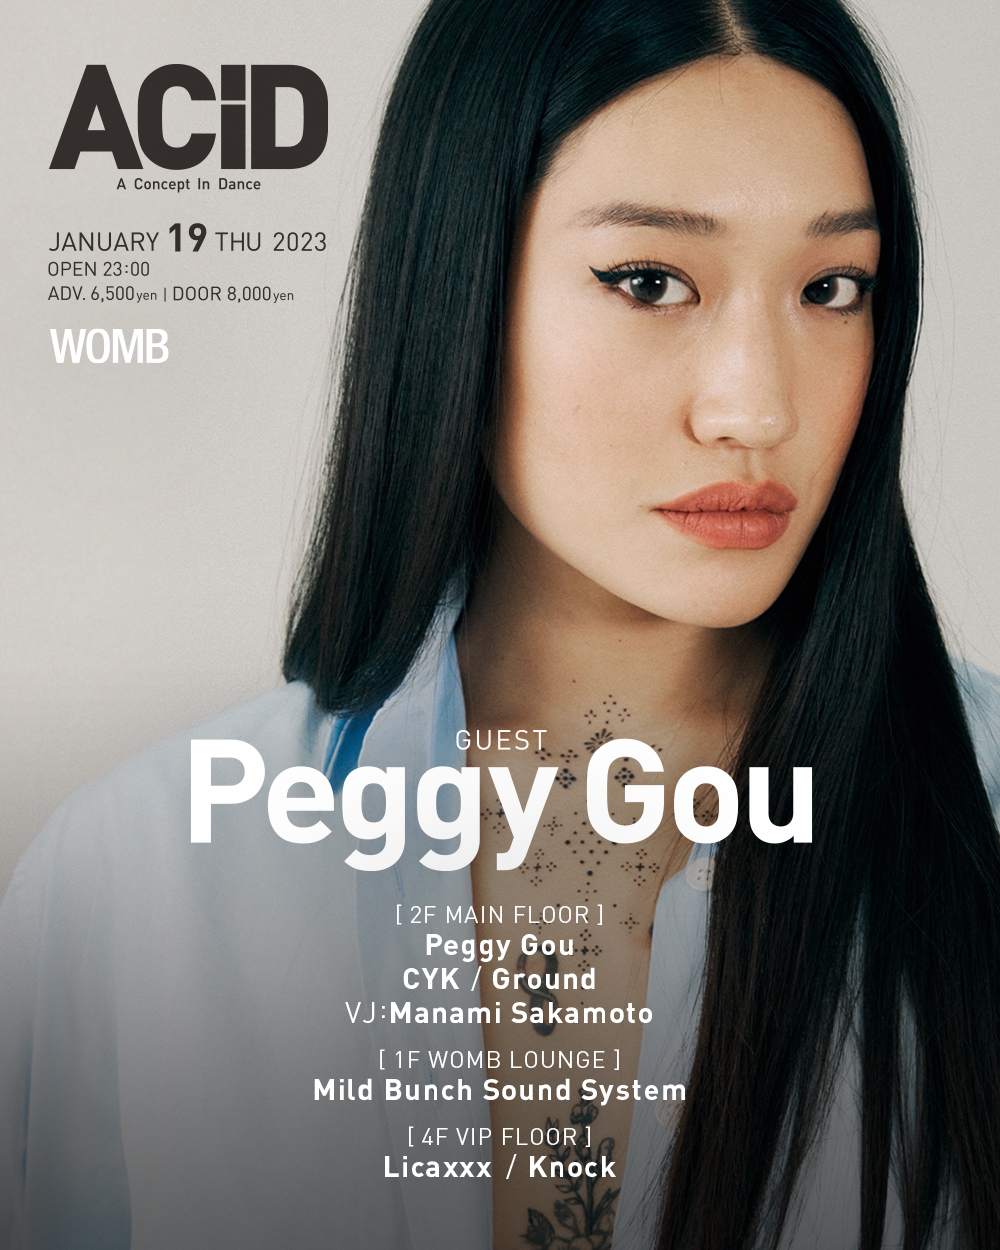 ACiD: A Concept in Dance - Peggy Gou - フライヤー表